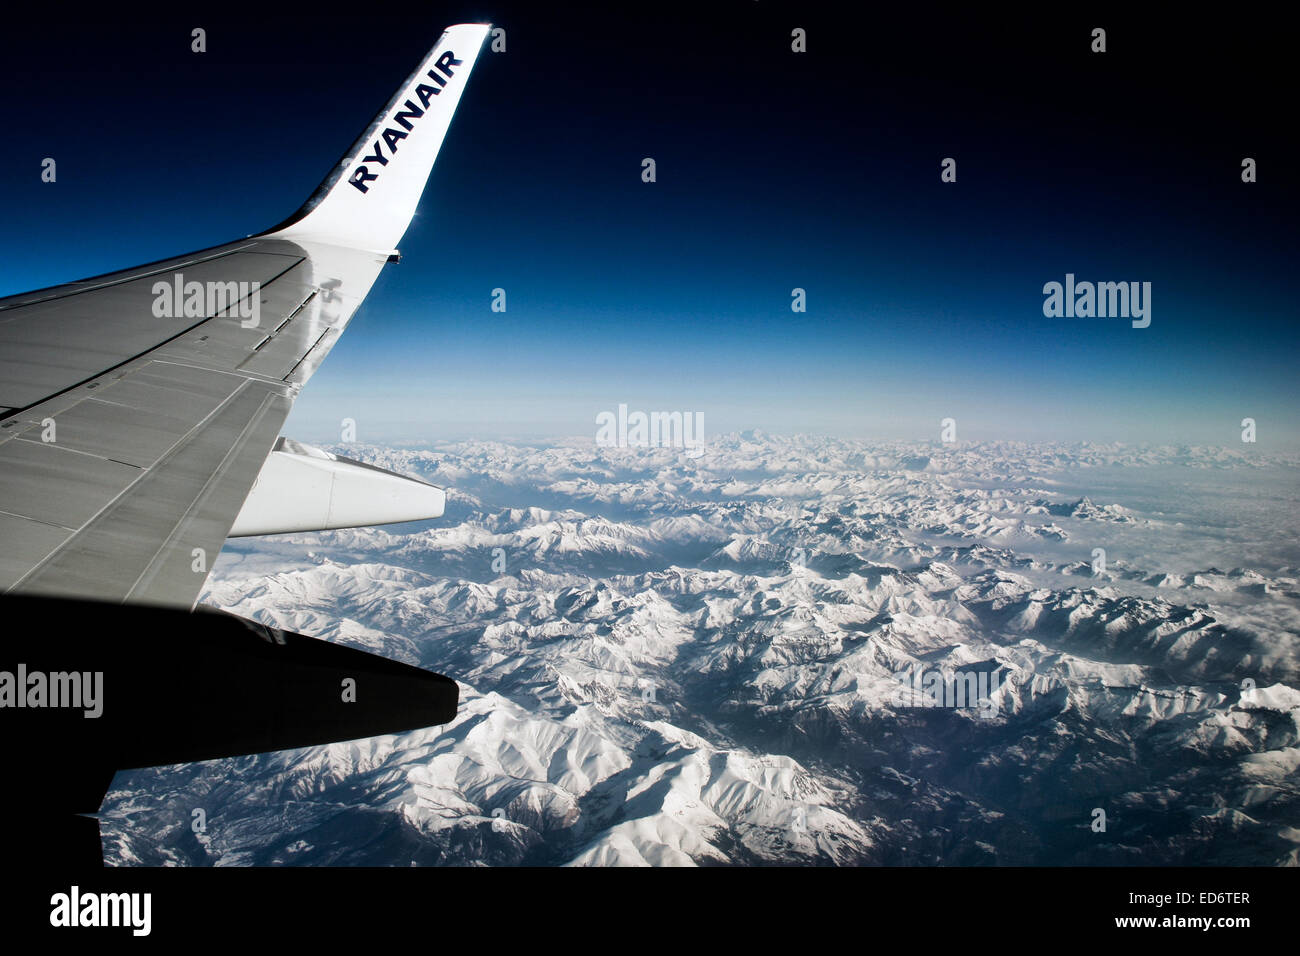 Ryanair Boeing 737-800 flying over the Alps. Stock Photo